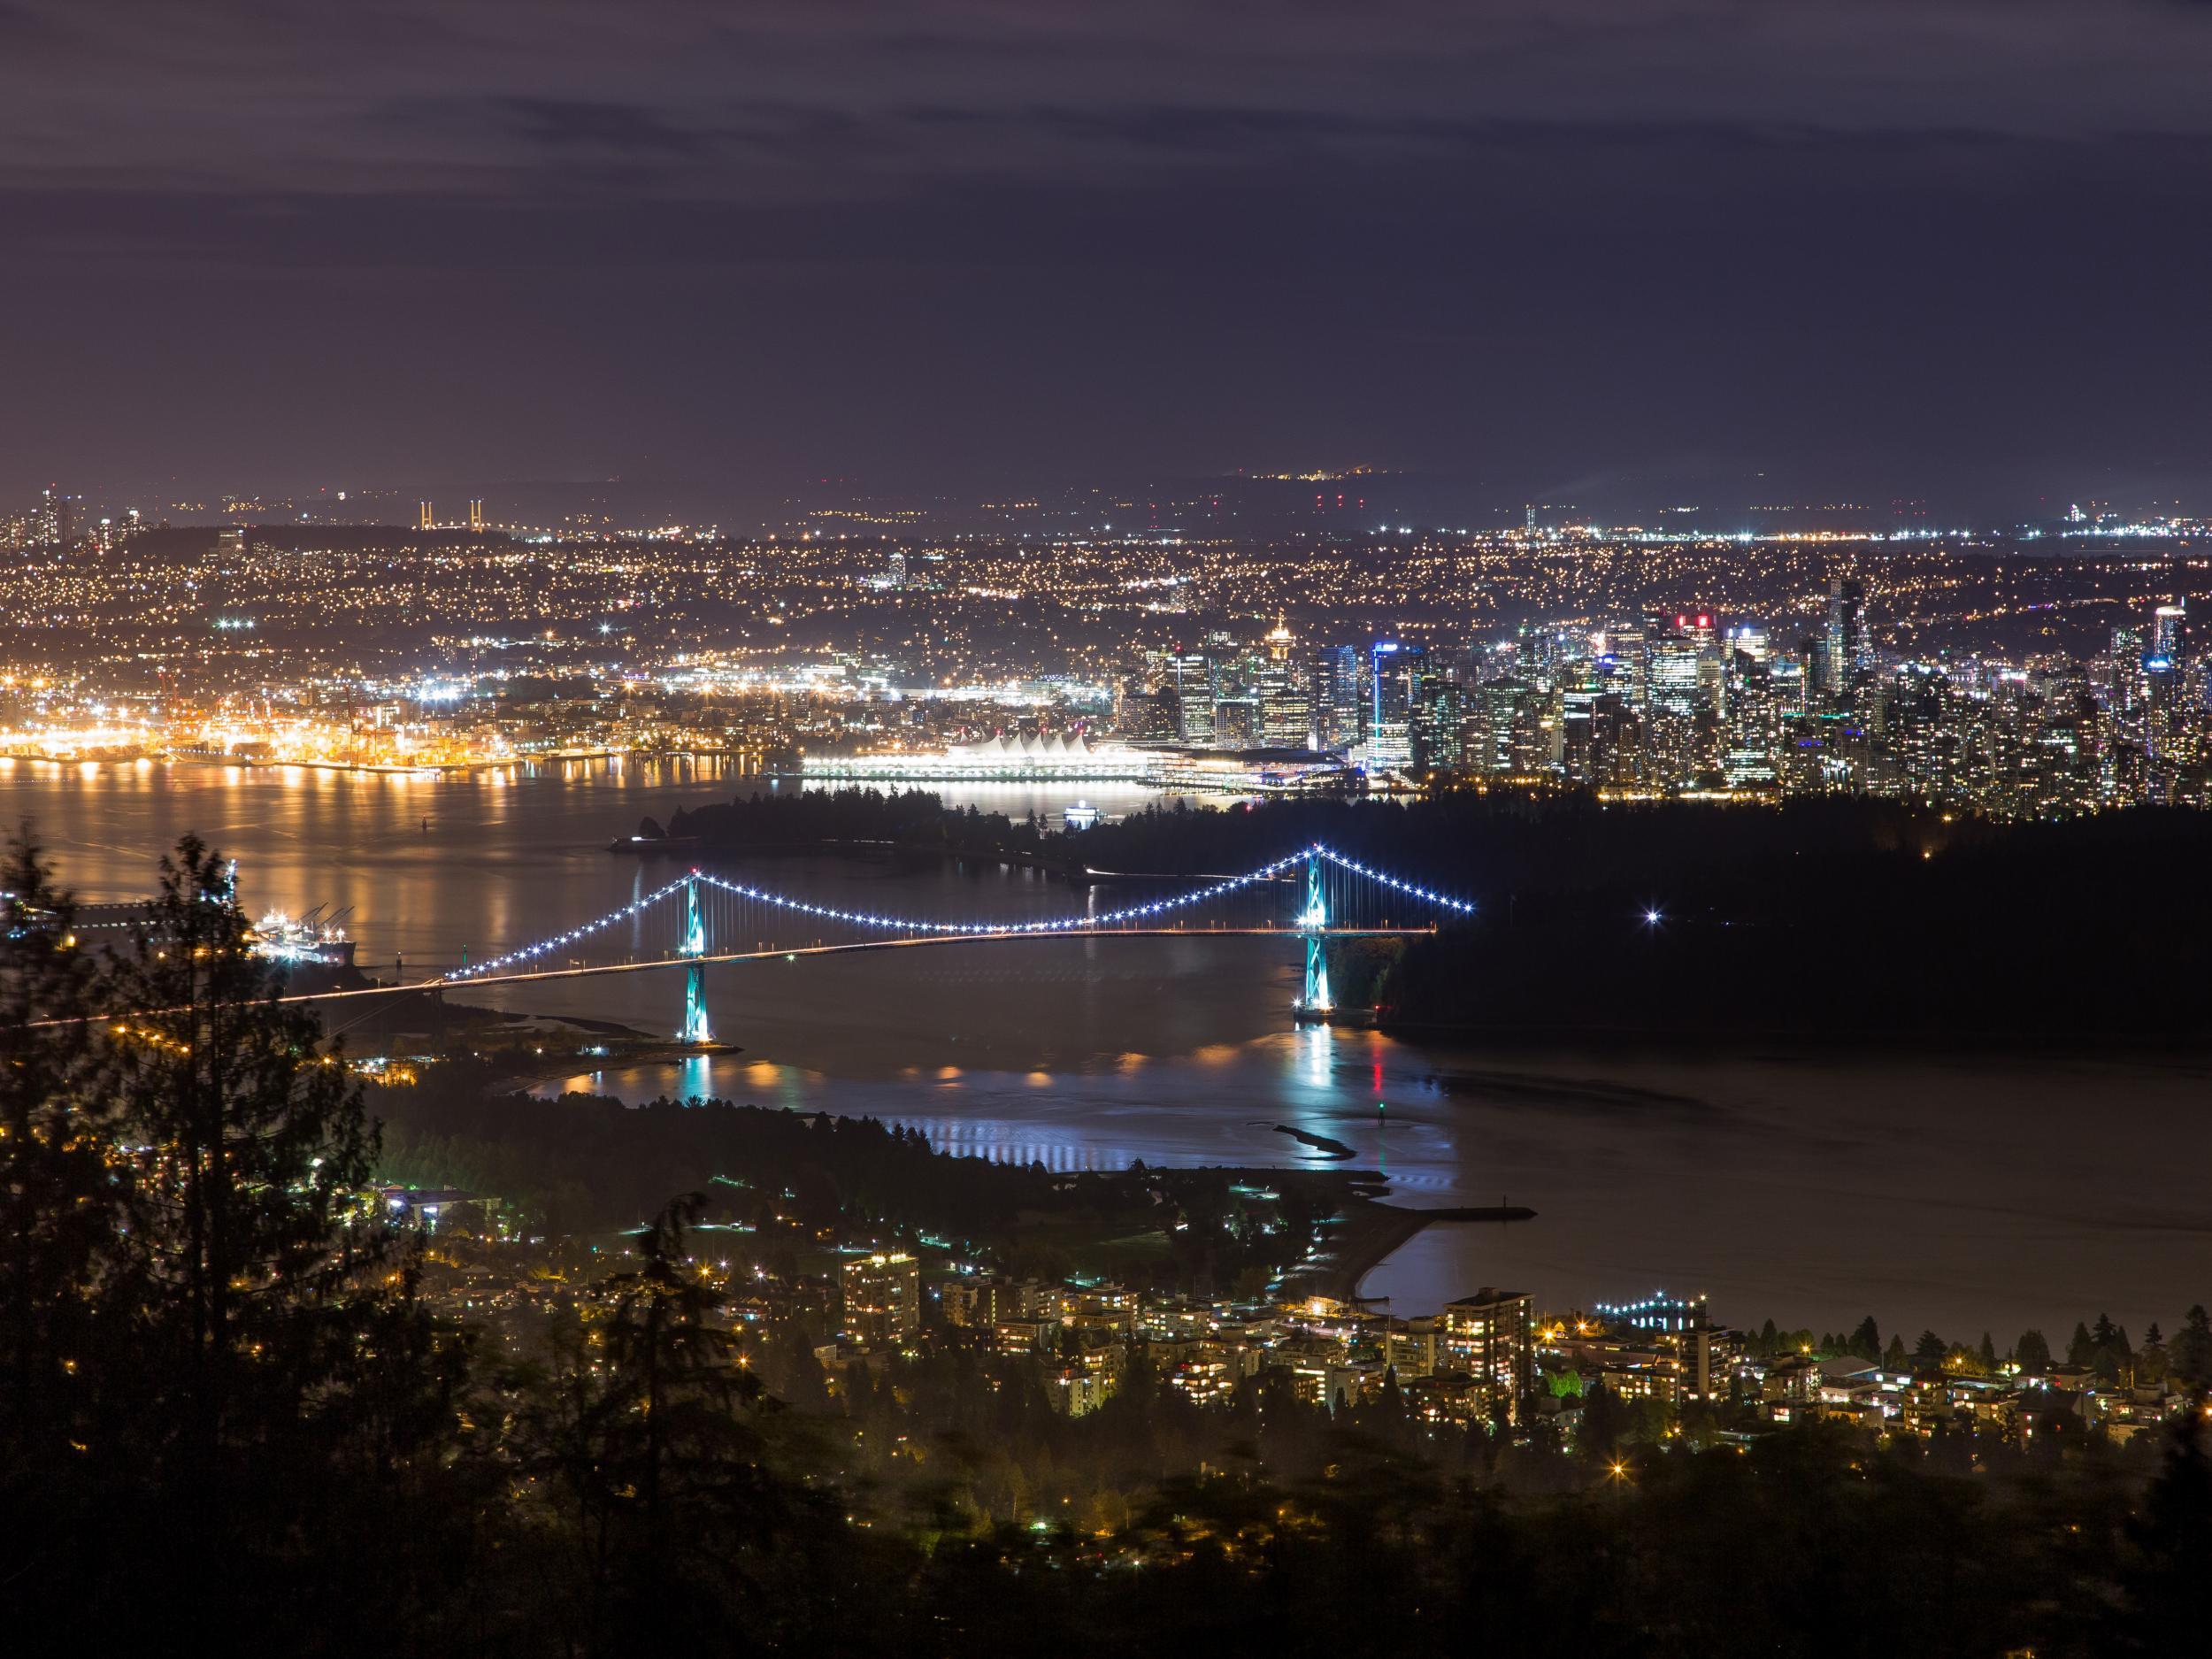 Ambleside Park gives great views over the Lions Gate Bridge and downtown Vancouver, especially after sunset